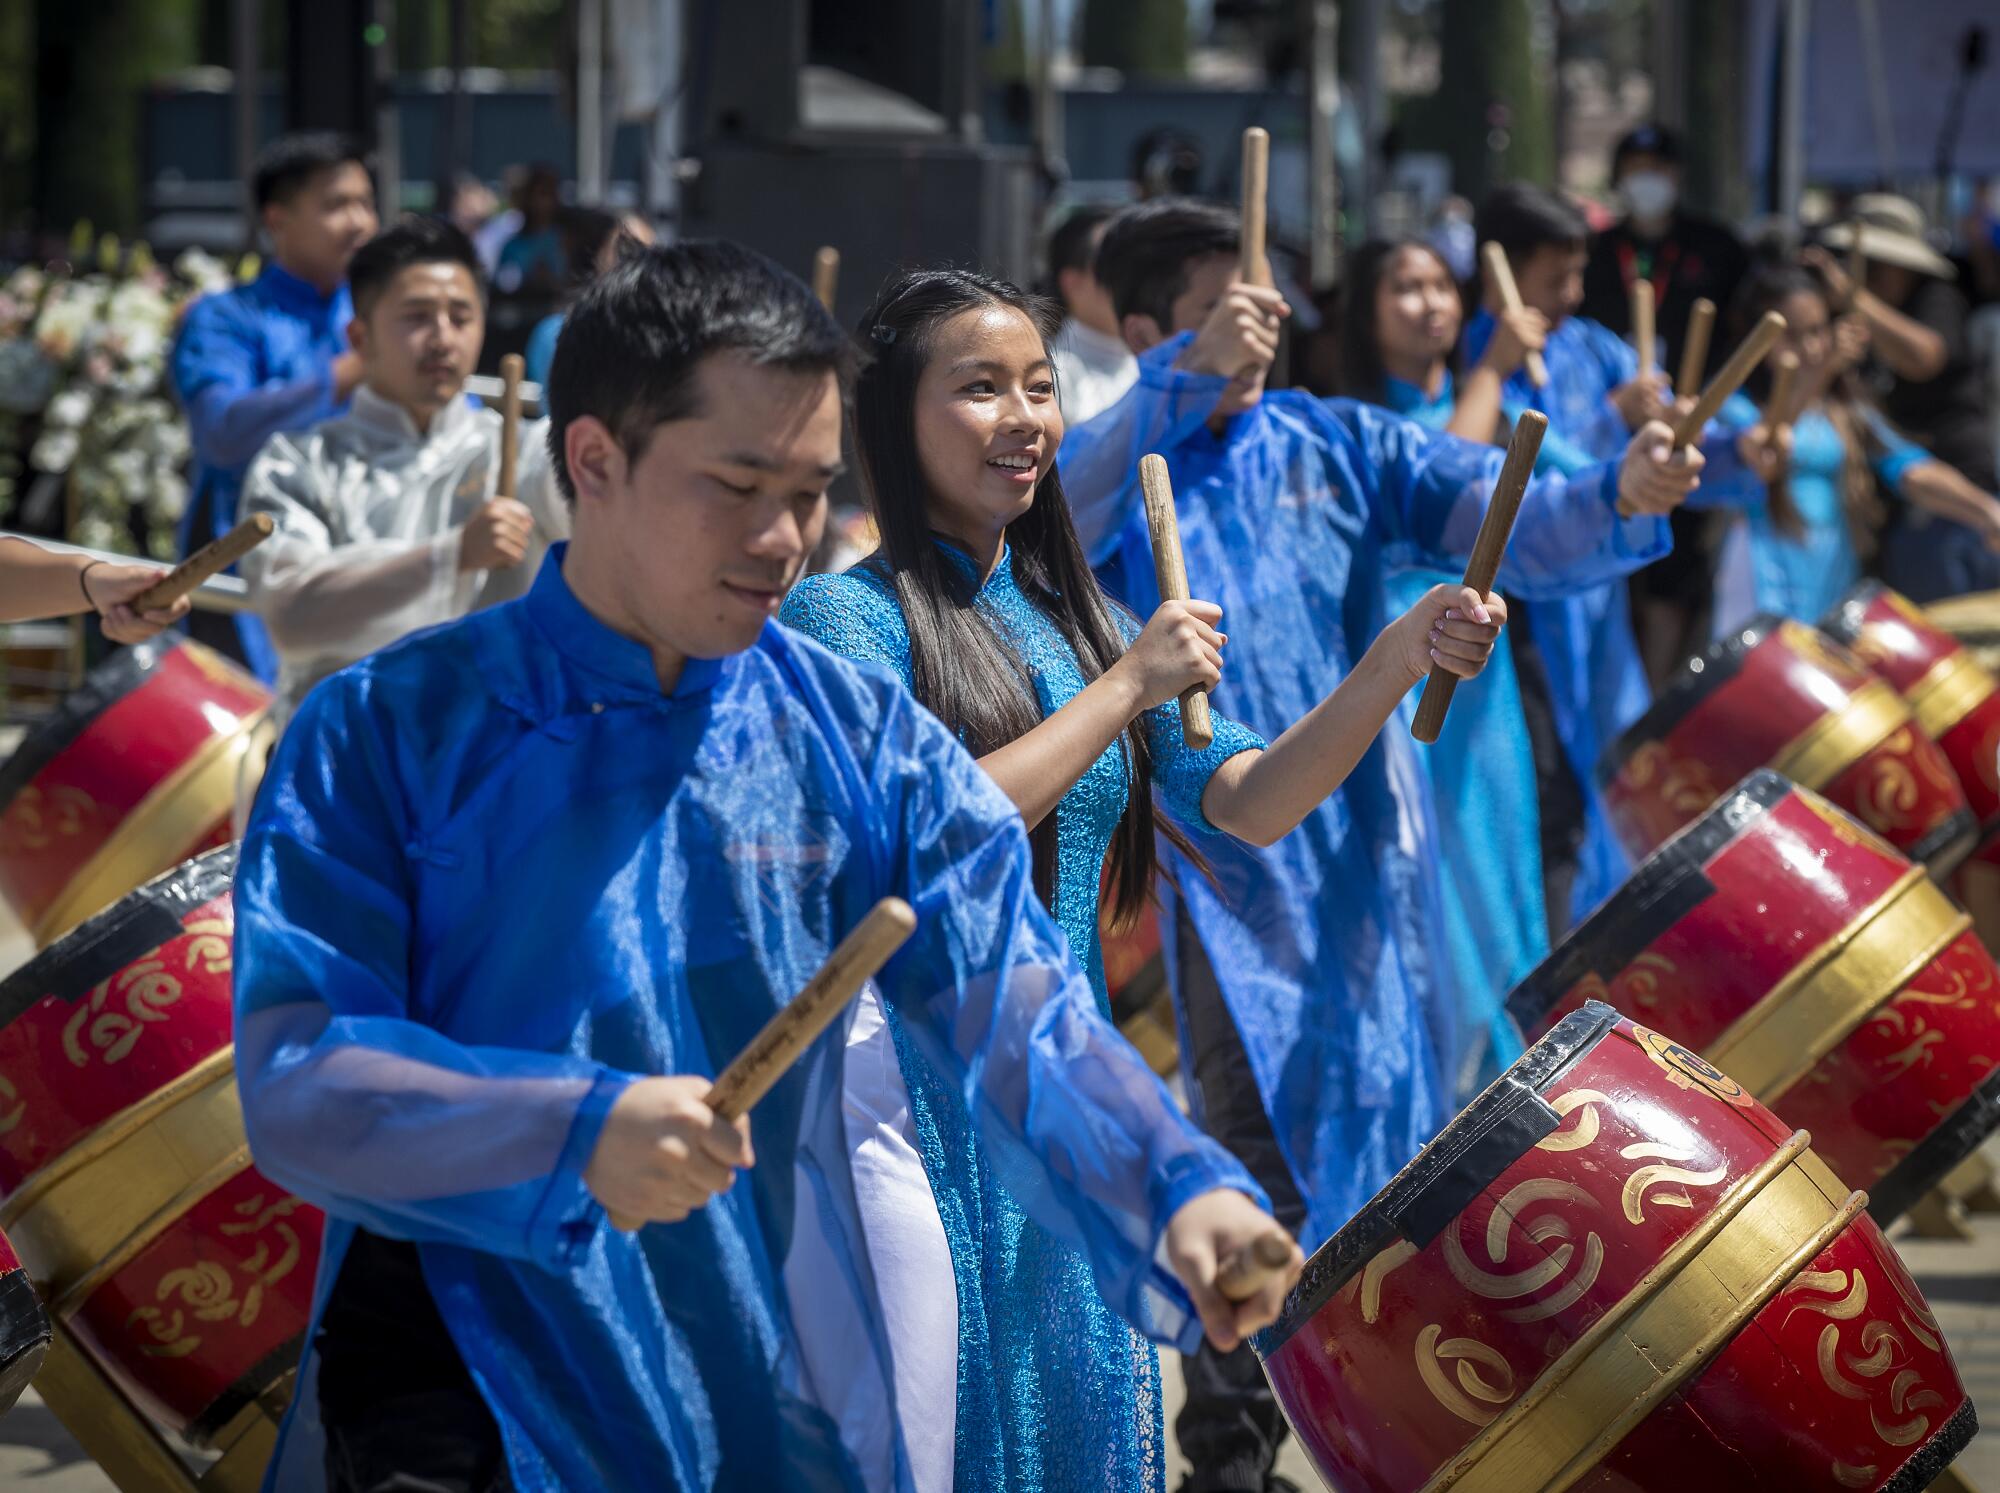 Drummers perform during a musical prelude and colorful procession.